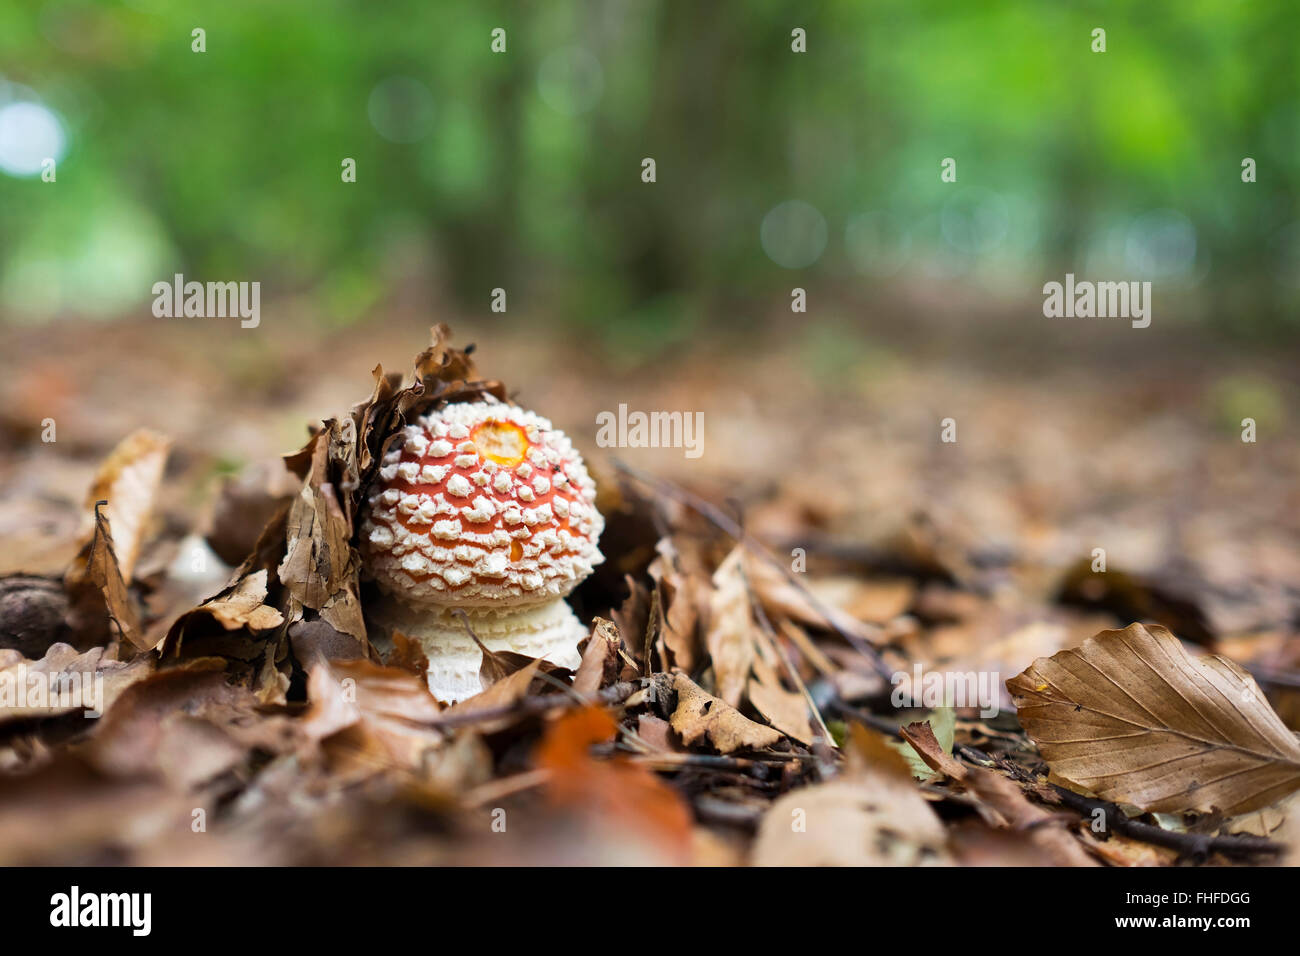 Ypung fly agaric, Amanita muscaria, autumn leaves Stock Photo